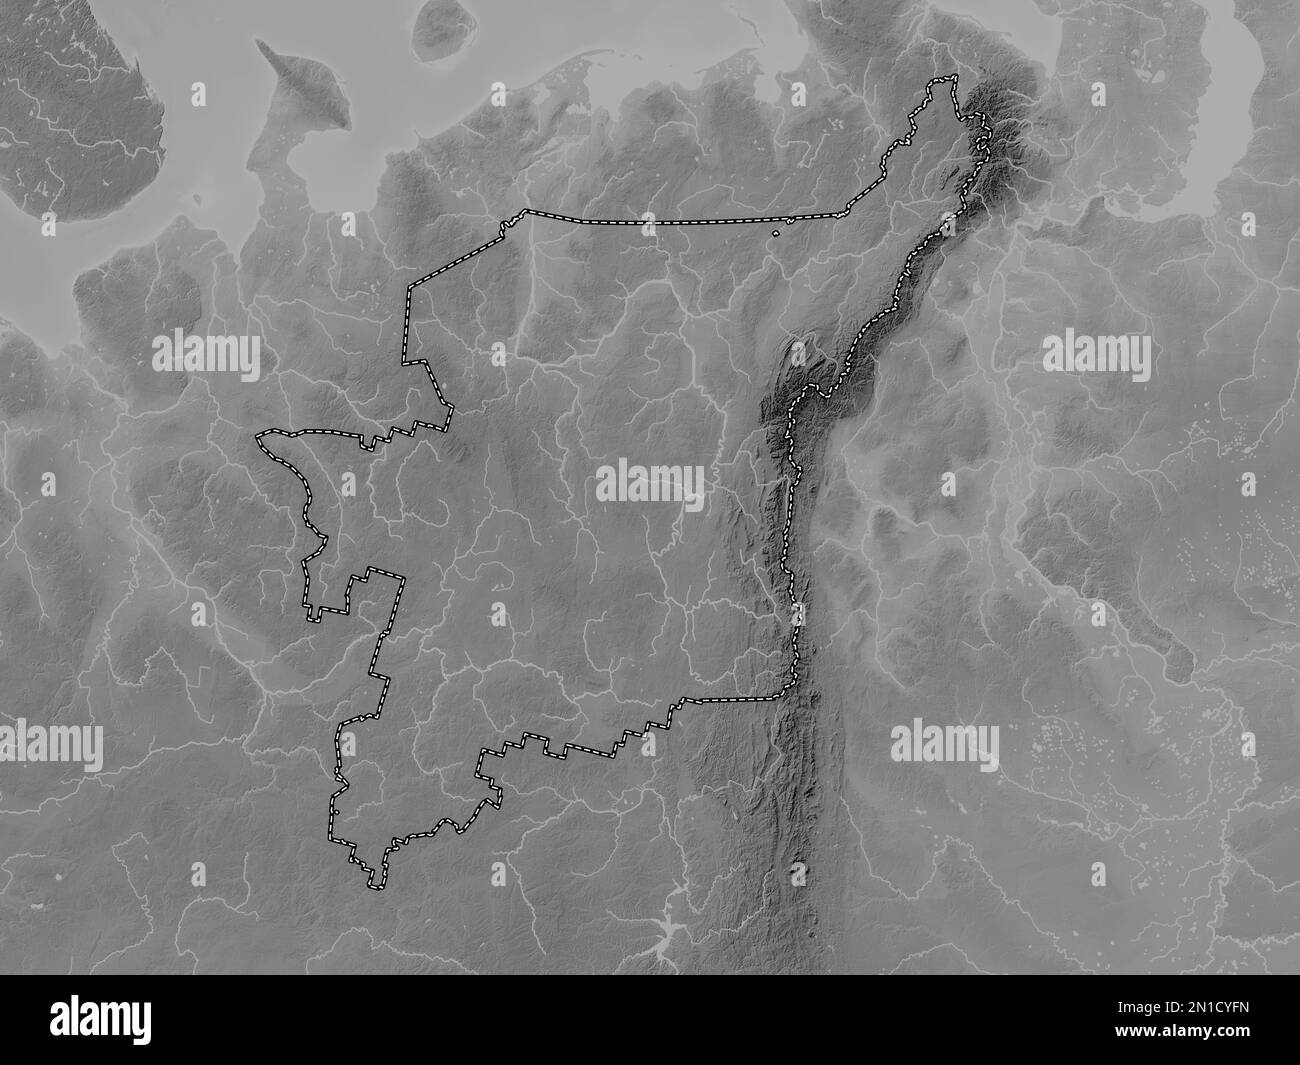 Komi, republic of Russia. Grayscale elevation map with lakes and rivers Stock Photo